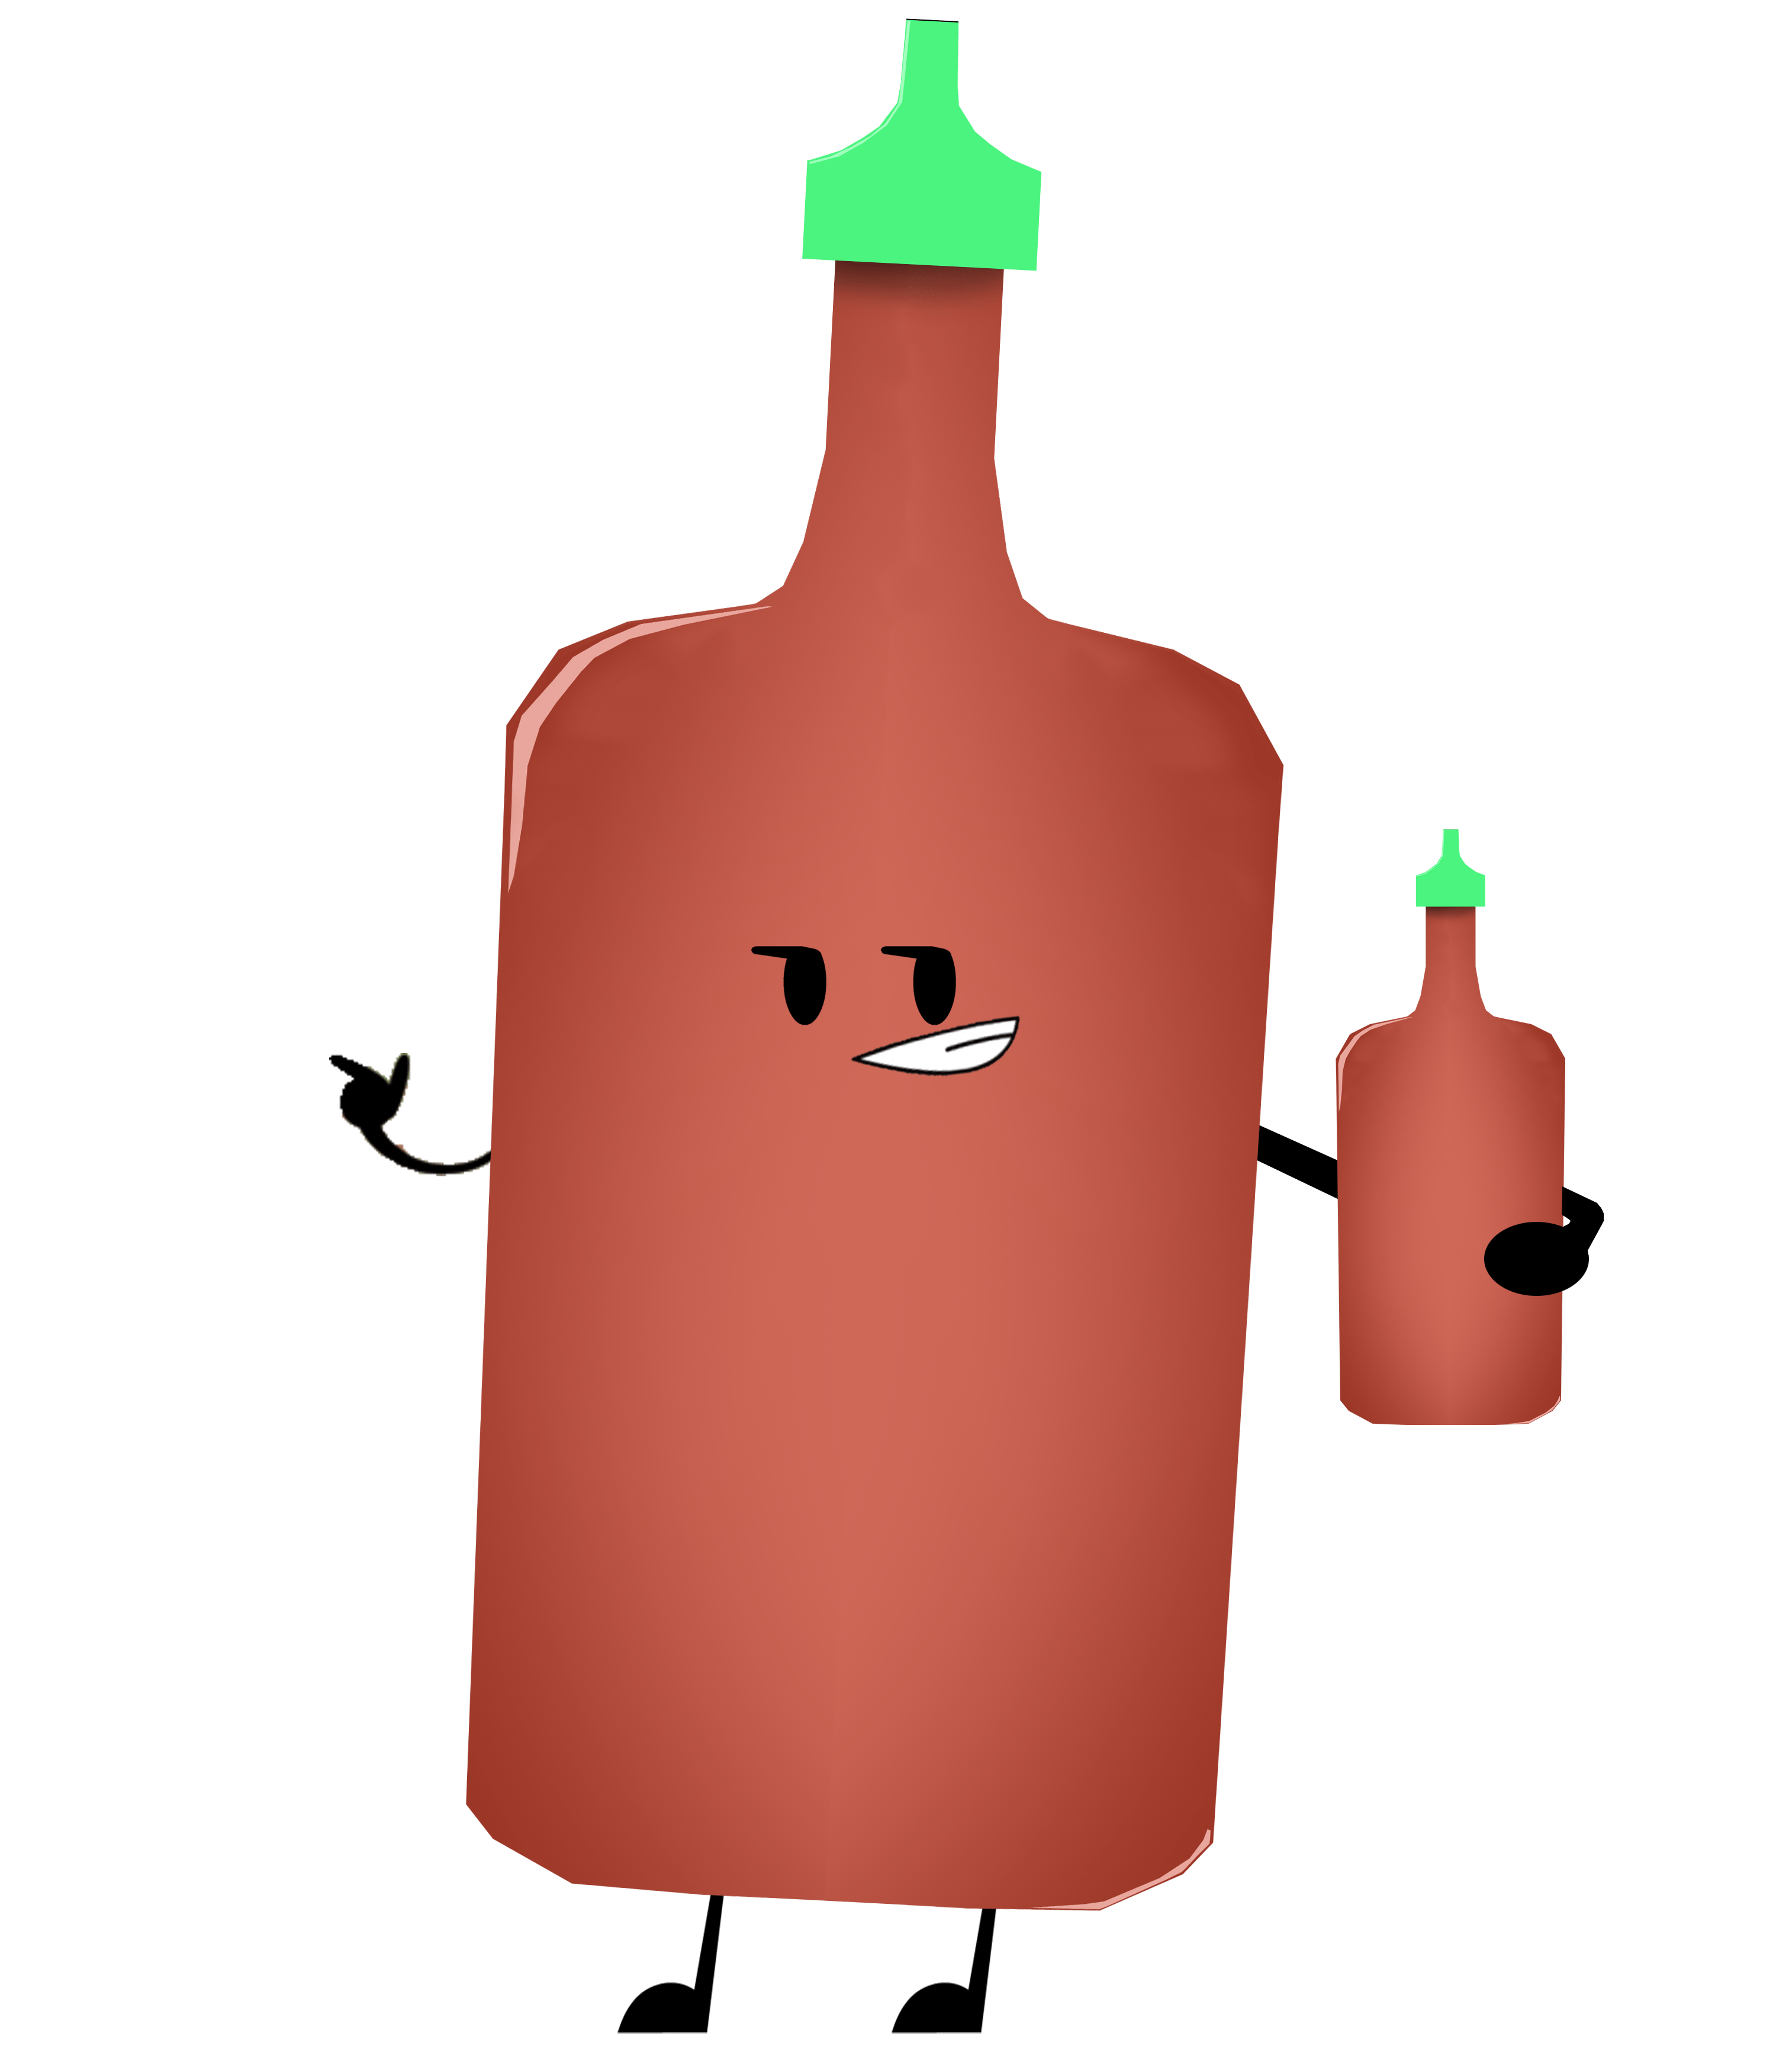 ketchup clipart red sauce